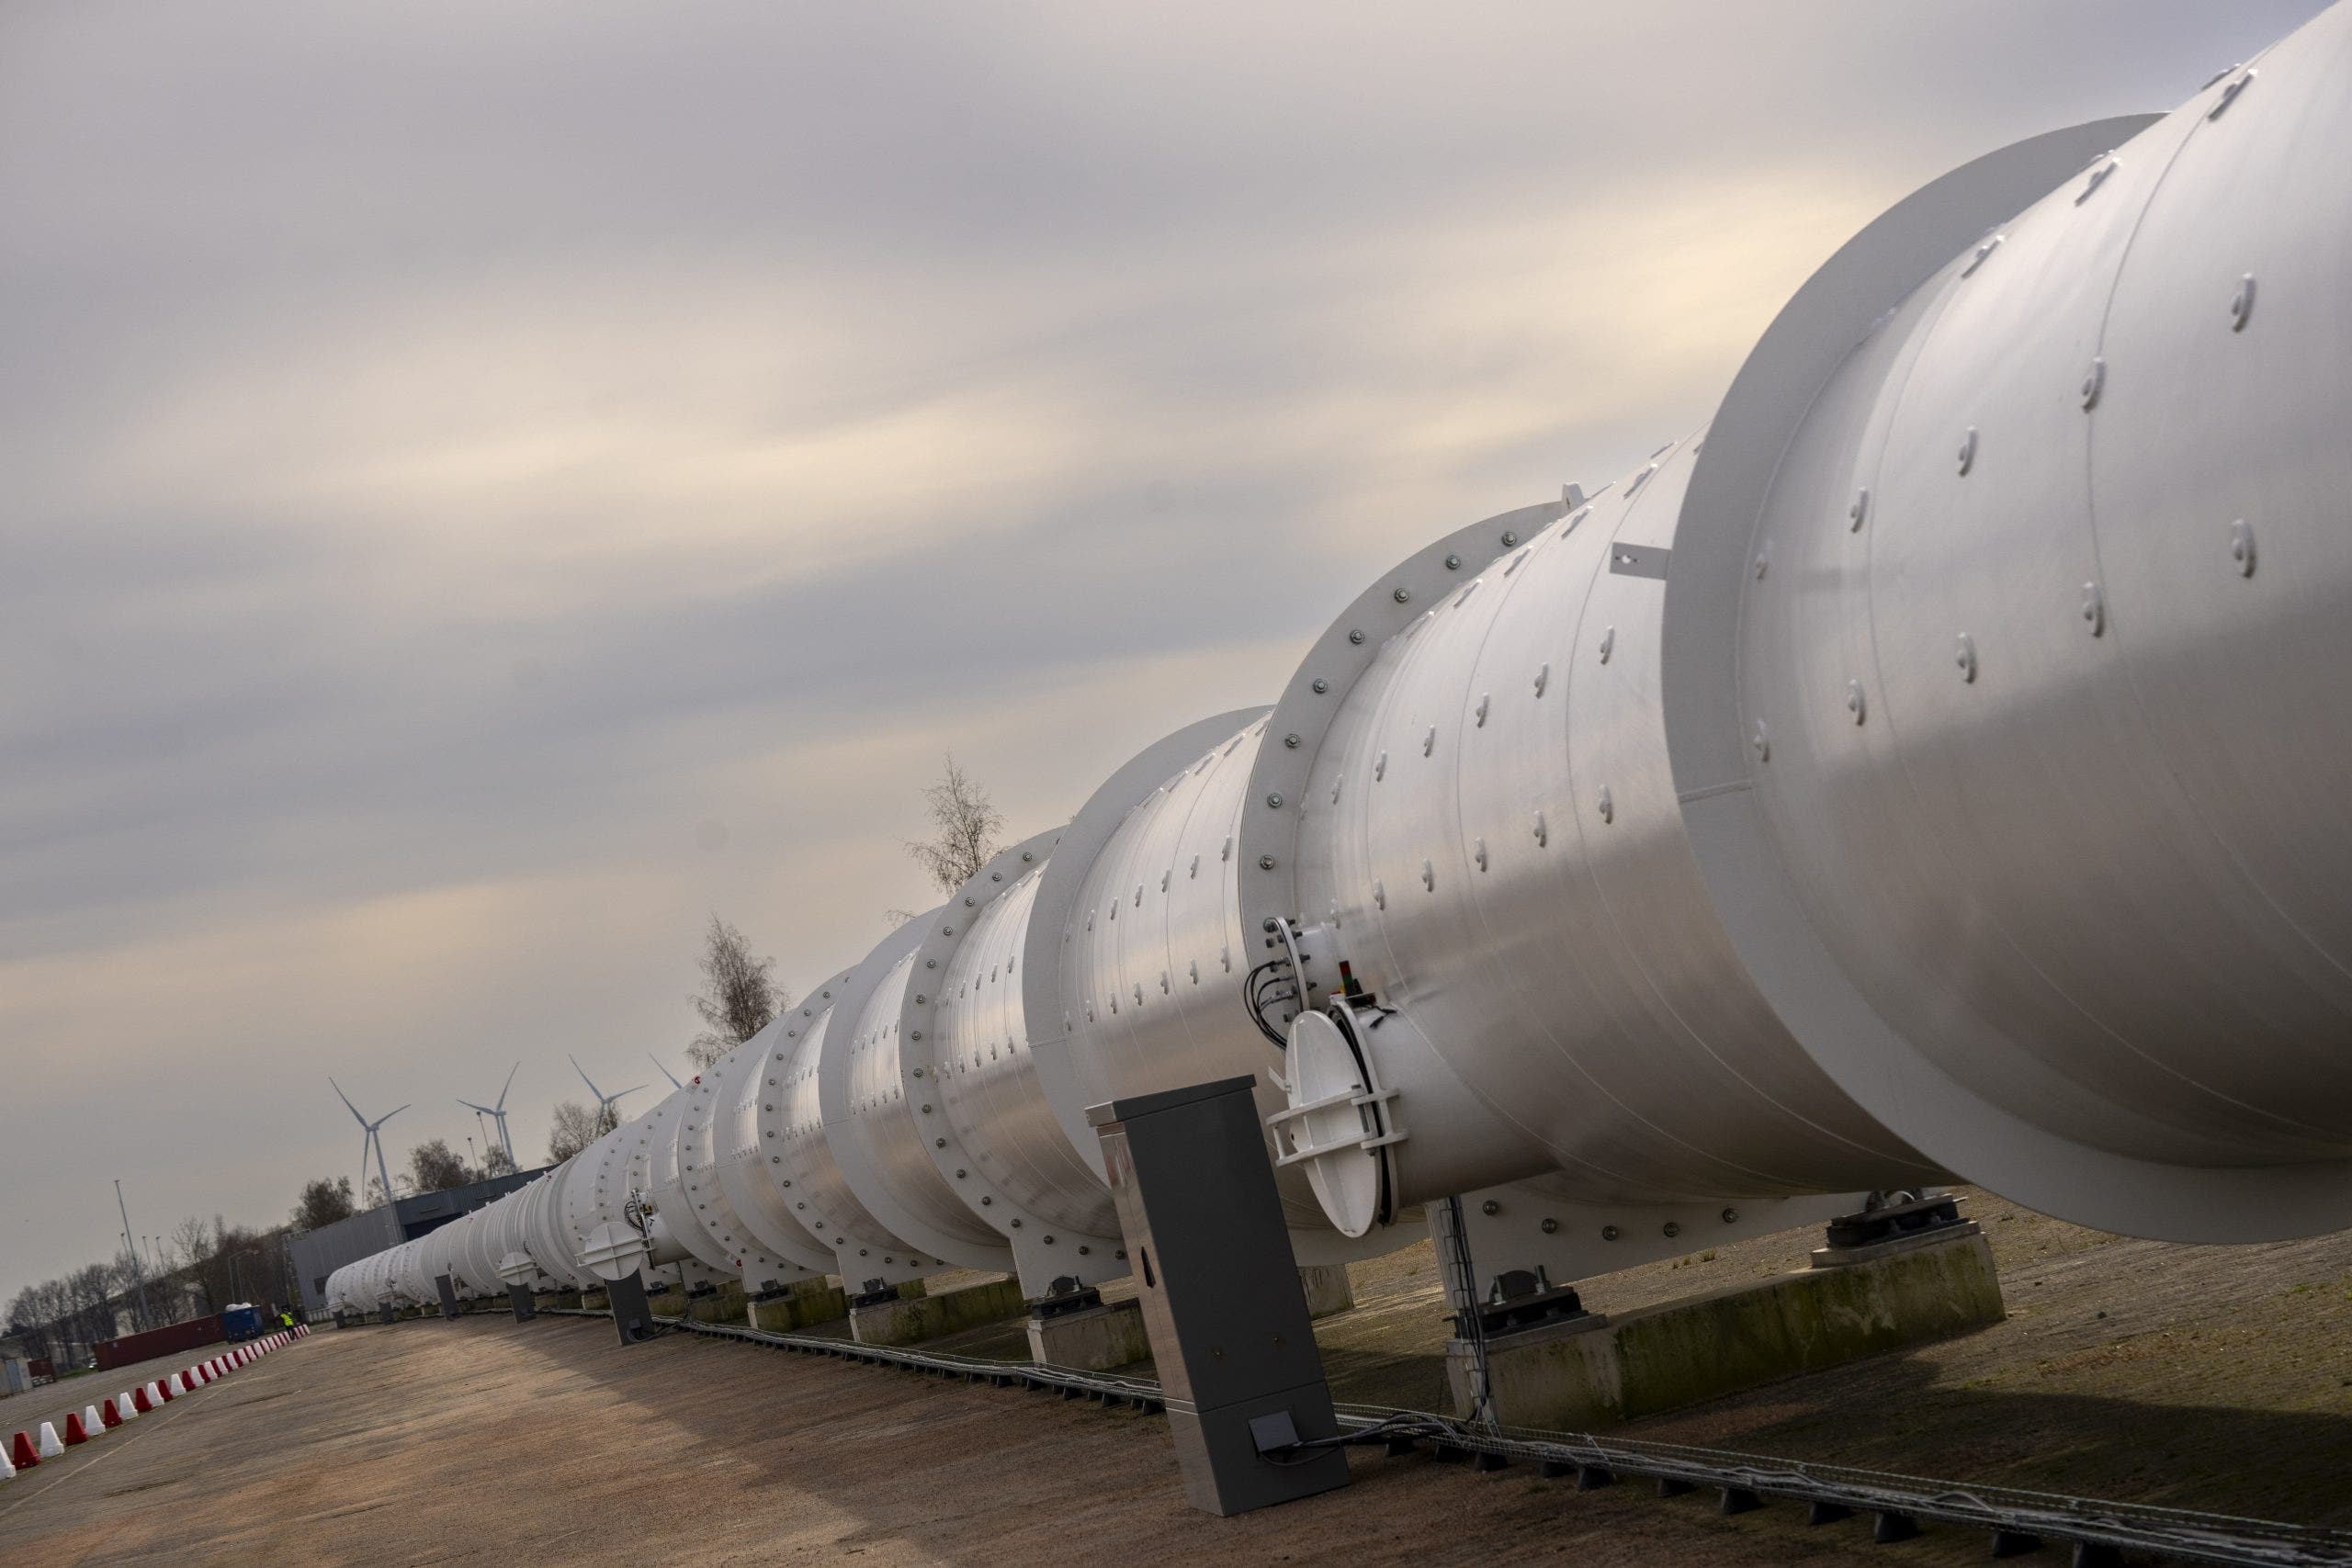 Netherlands hyperloop aims to improve transportation of people and freight with new technology